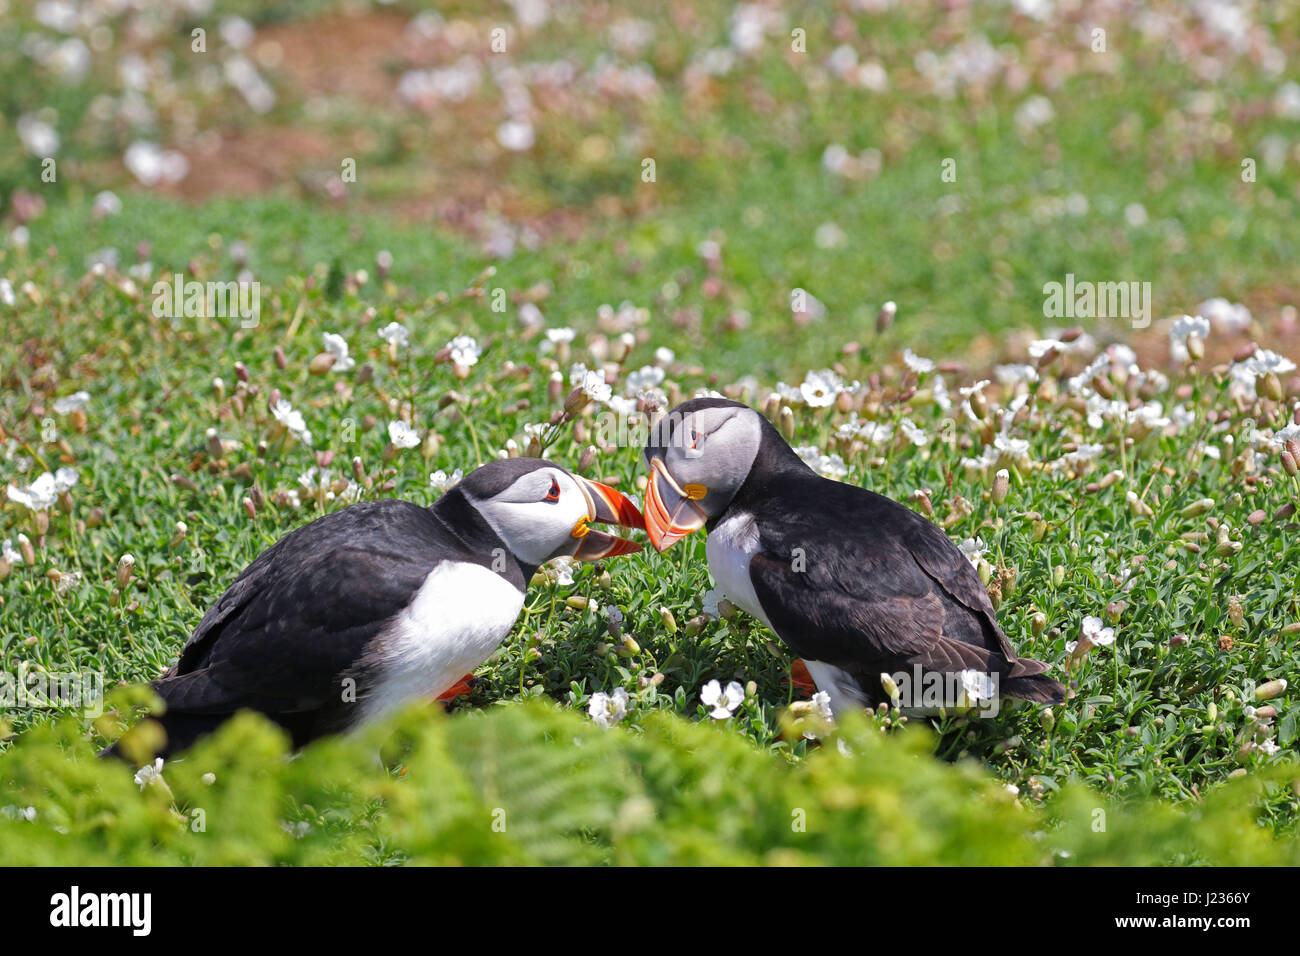 Puffins courtship display at Skoma Island, South West Wales UK Stock Photo